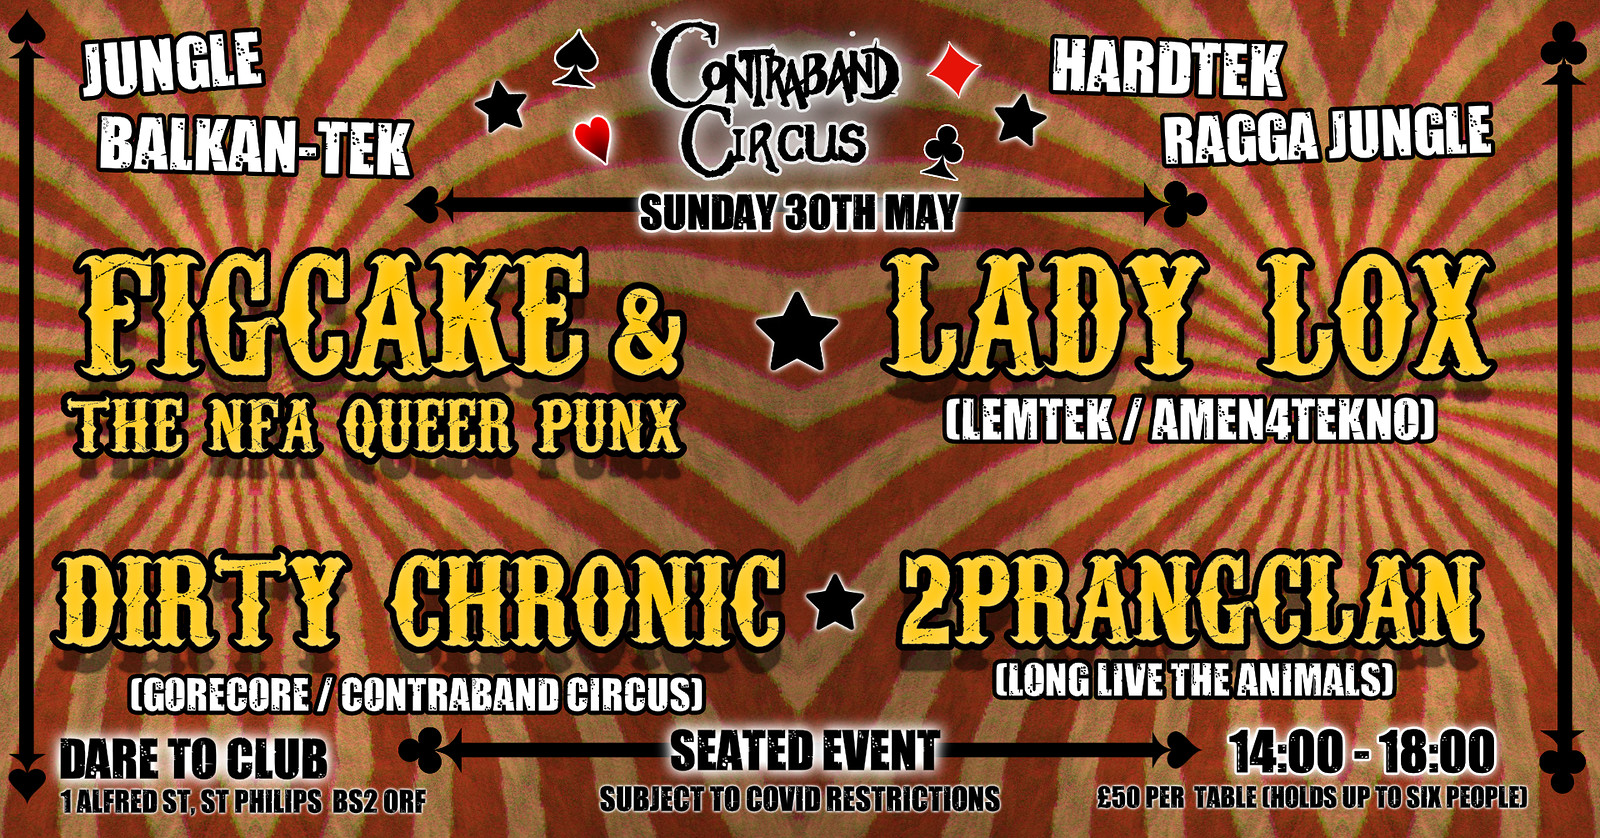 Contraband Circus - afternoon & evening session at Dare to Club